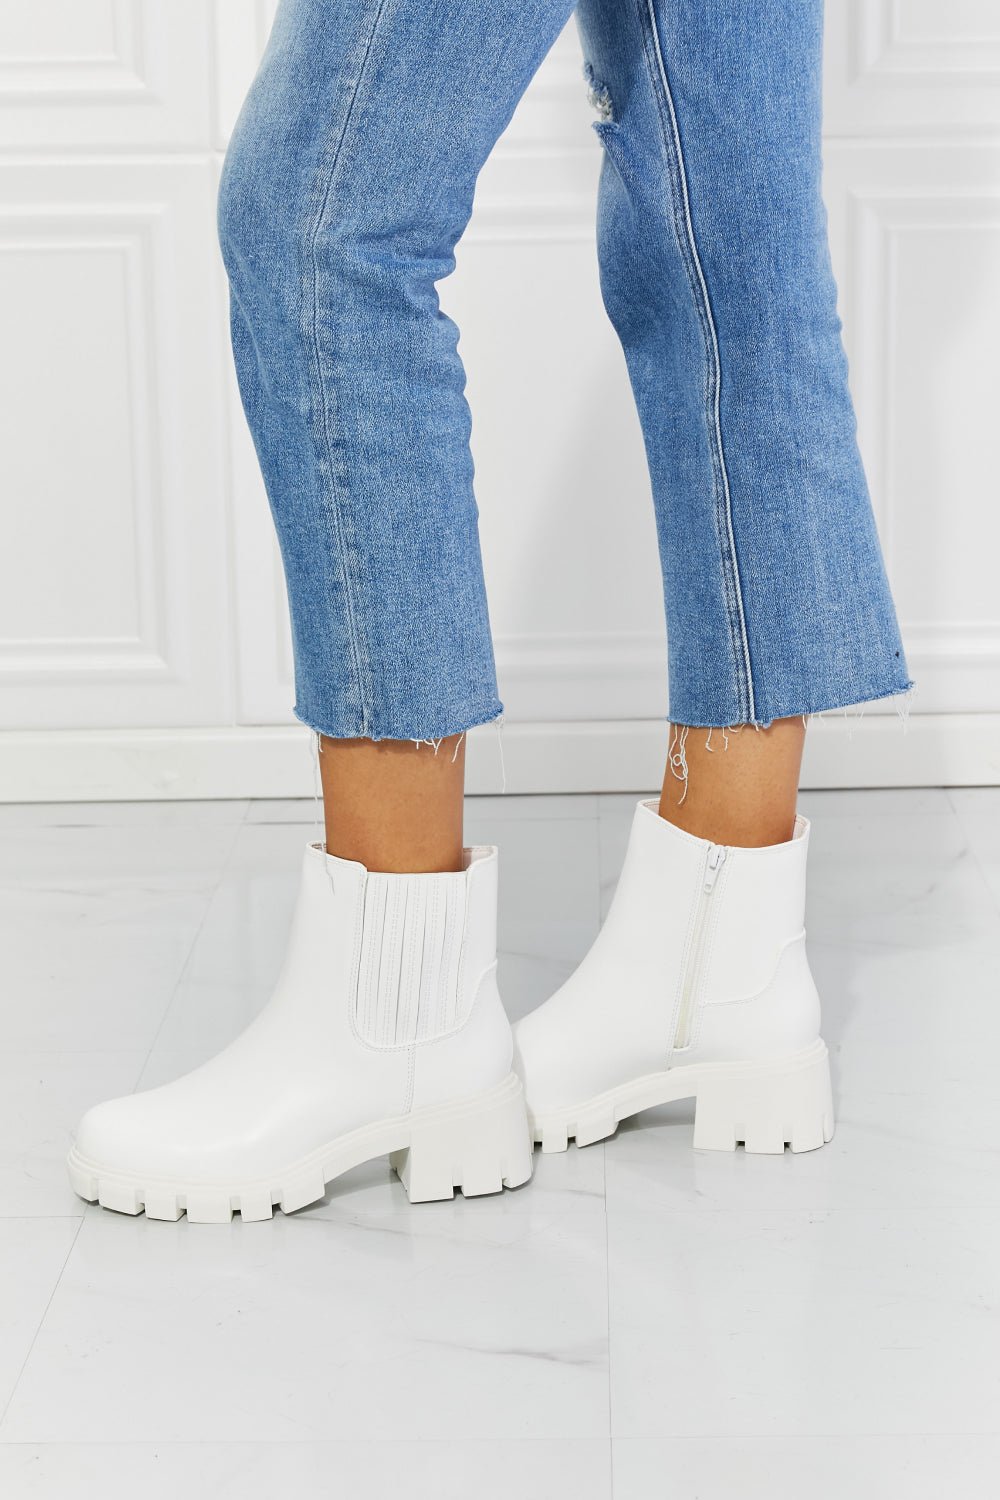 MMShoes What It Takes Lug Sole Chelsea Boots in White - pvmark